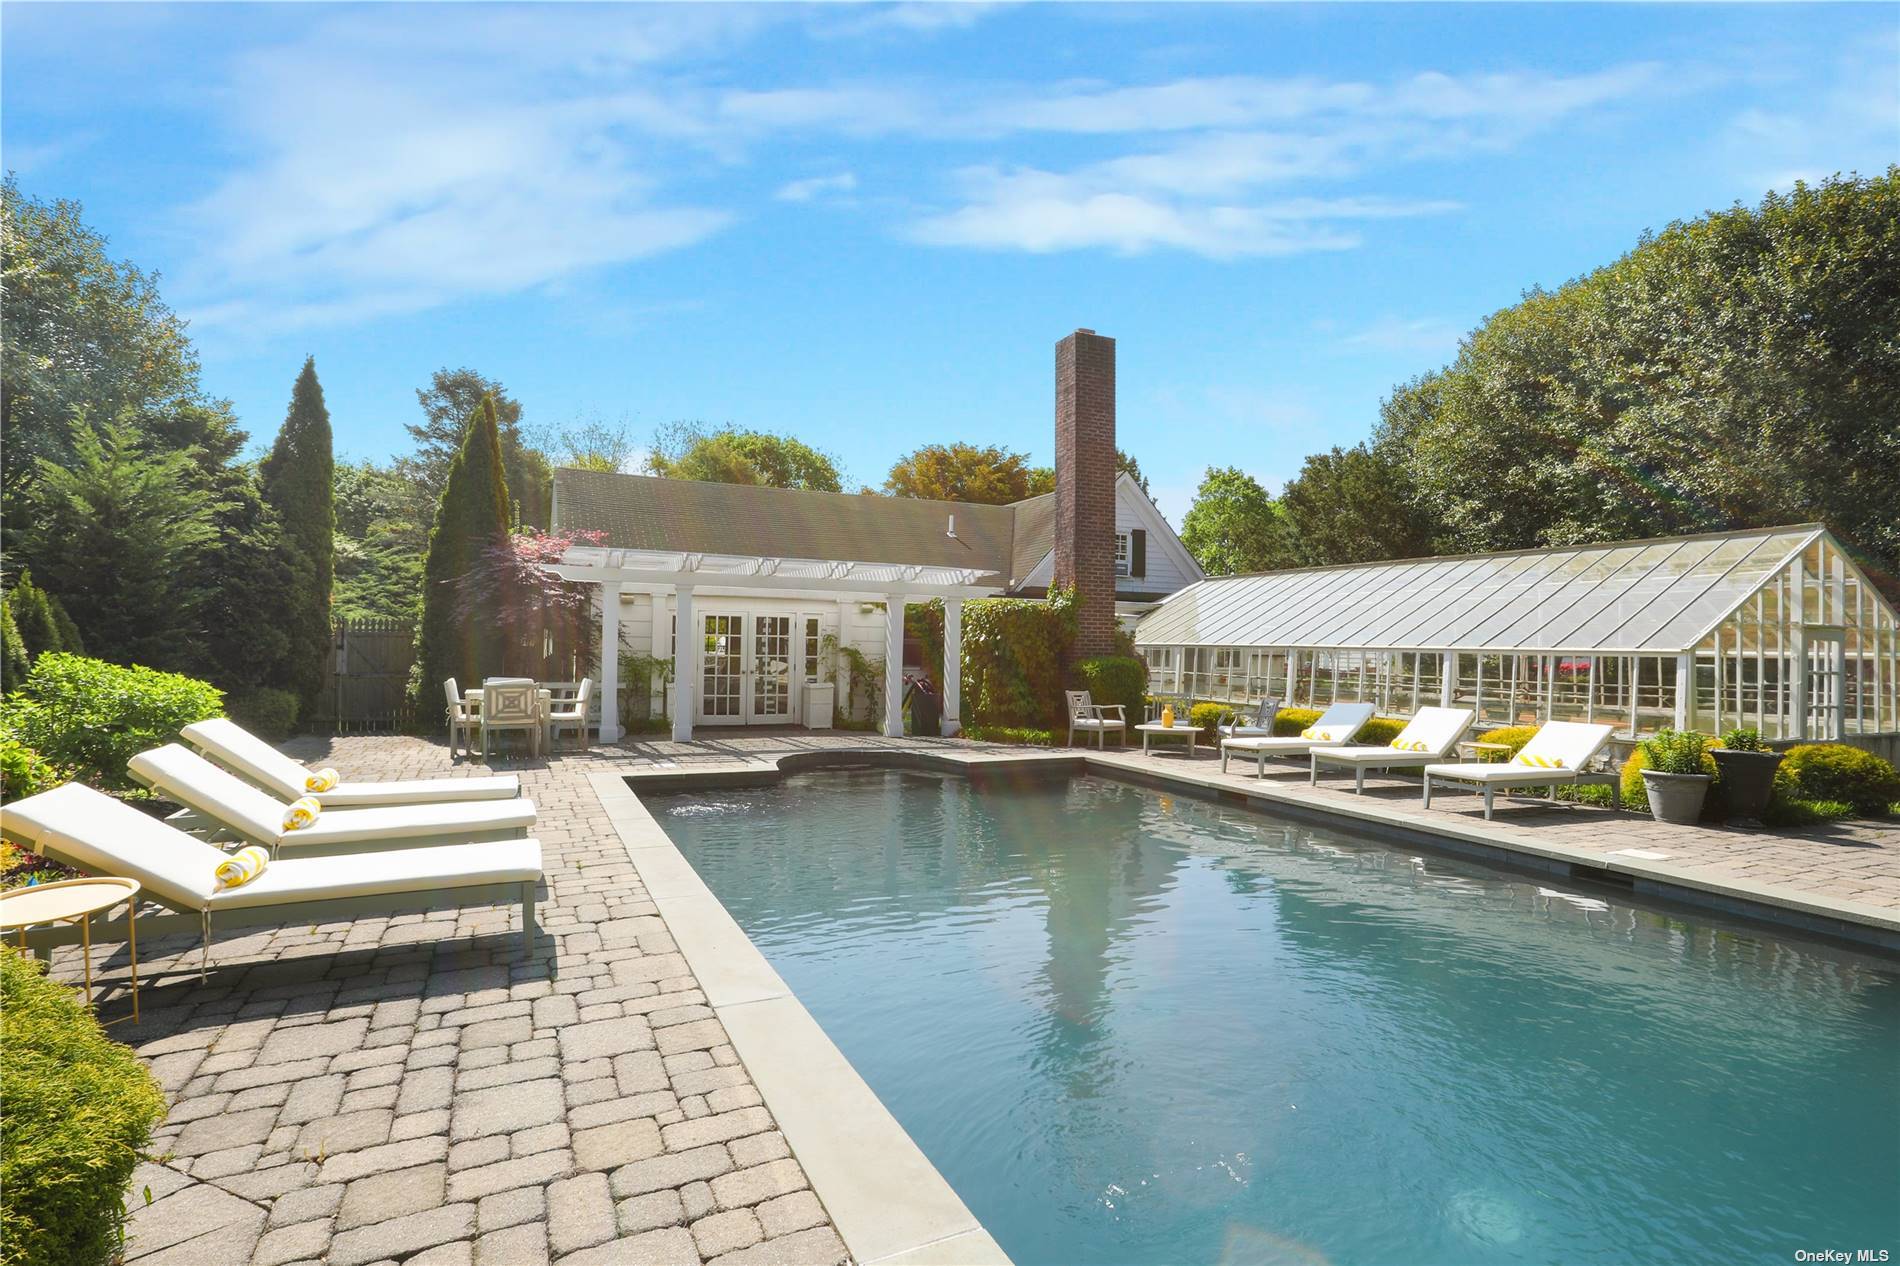 Now Is Your Chance To Rent The Historic Robinson Estate on Long Island's South Shore.